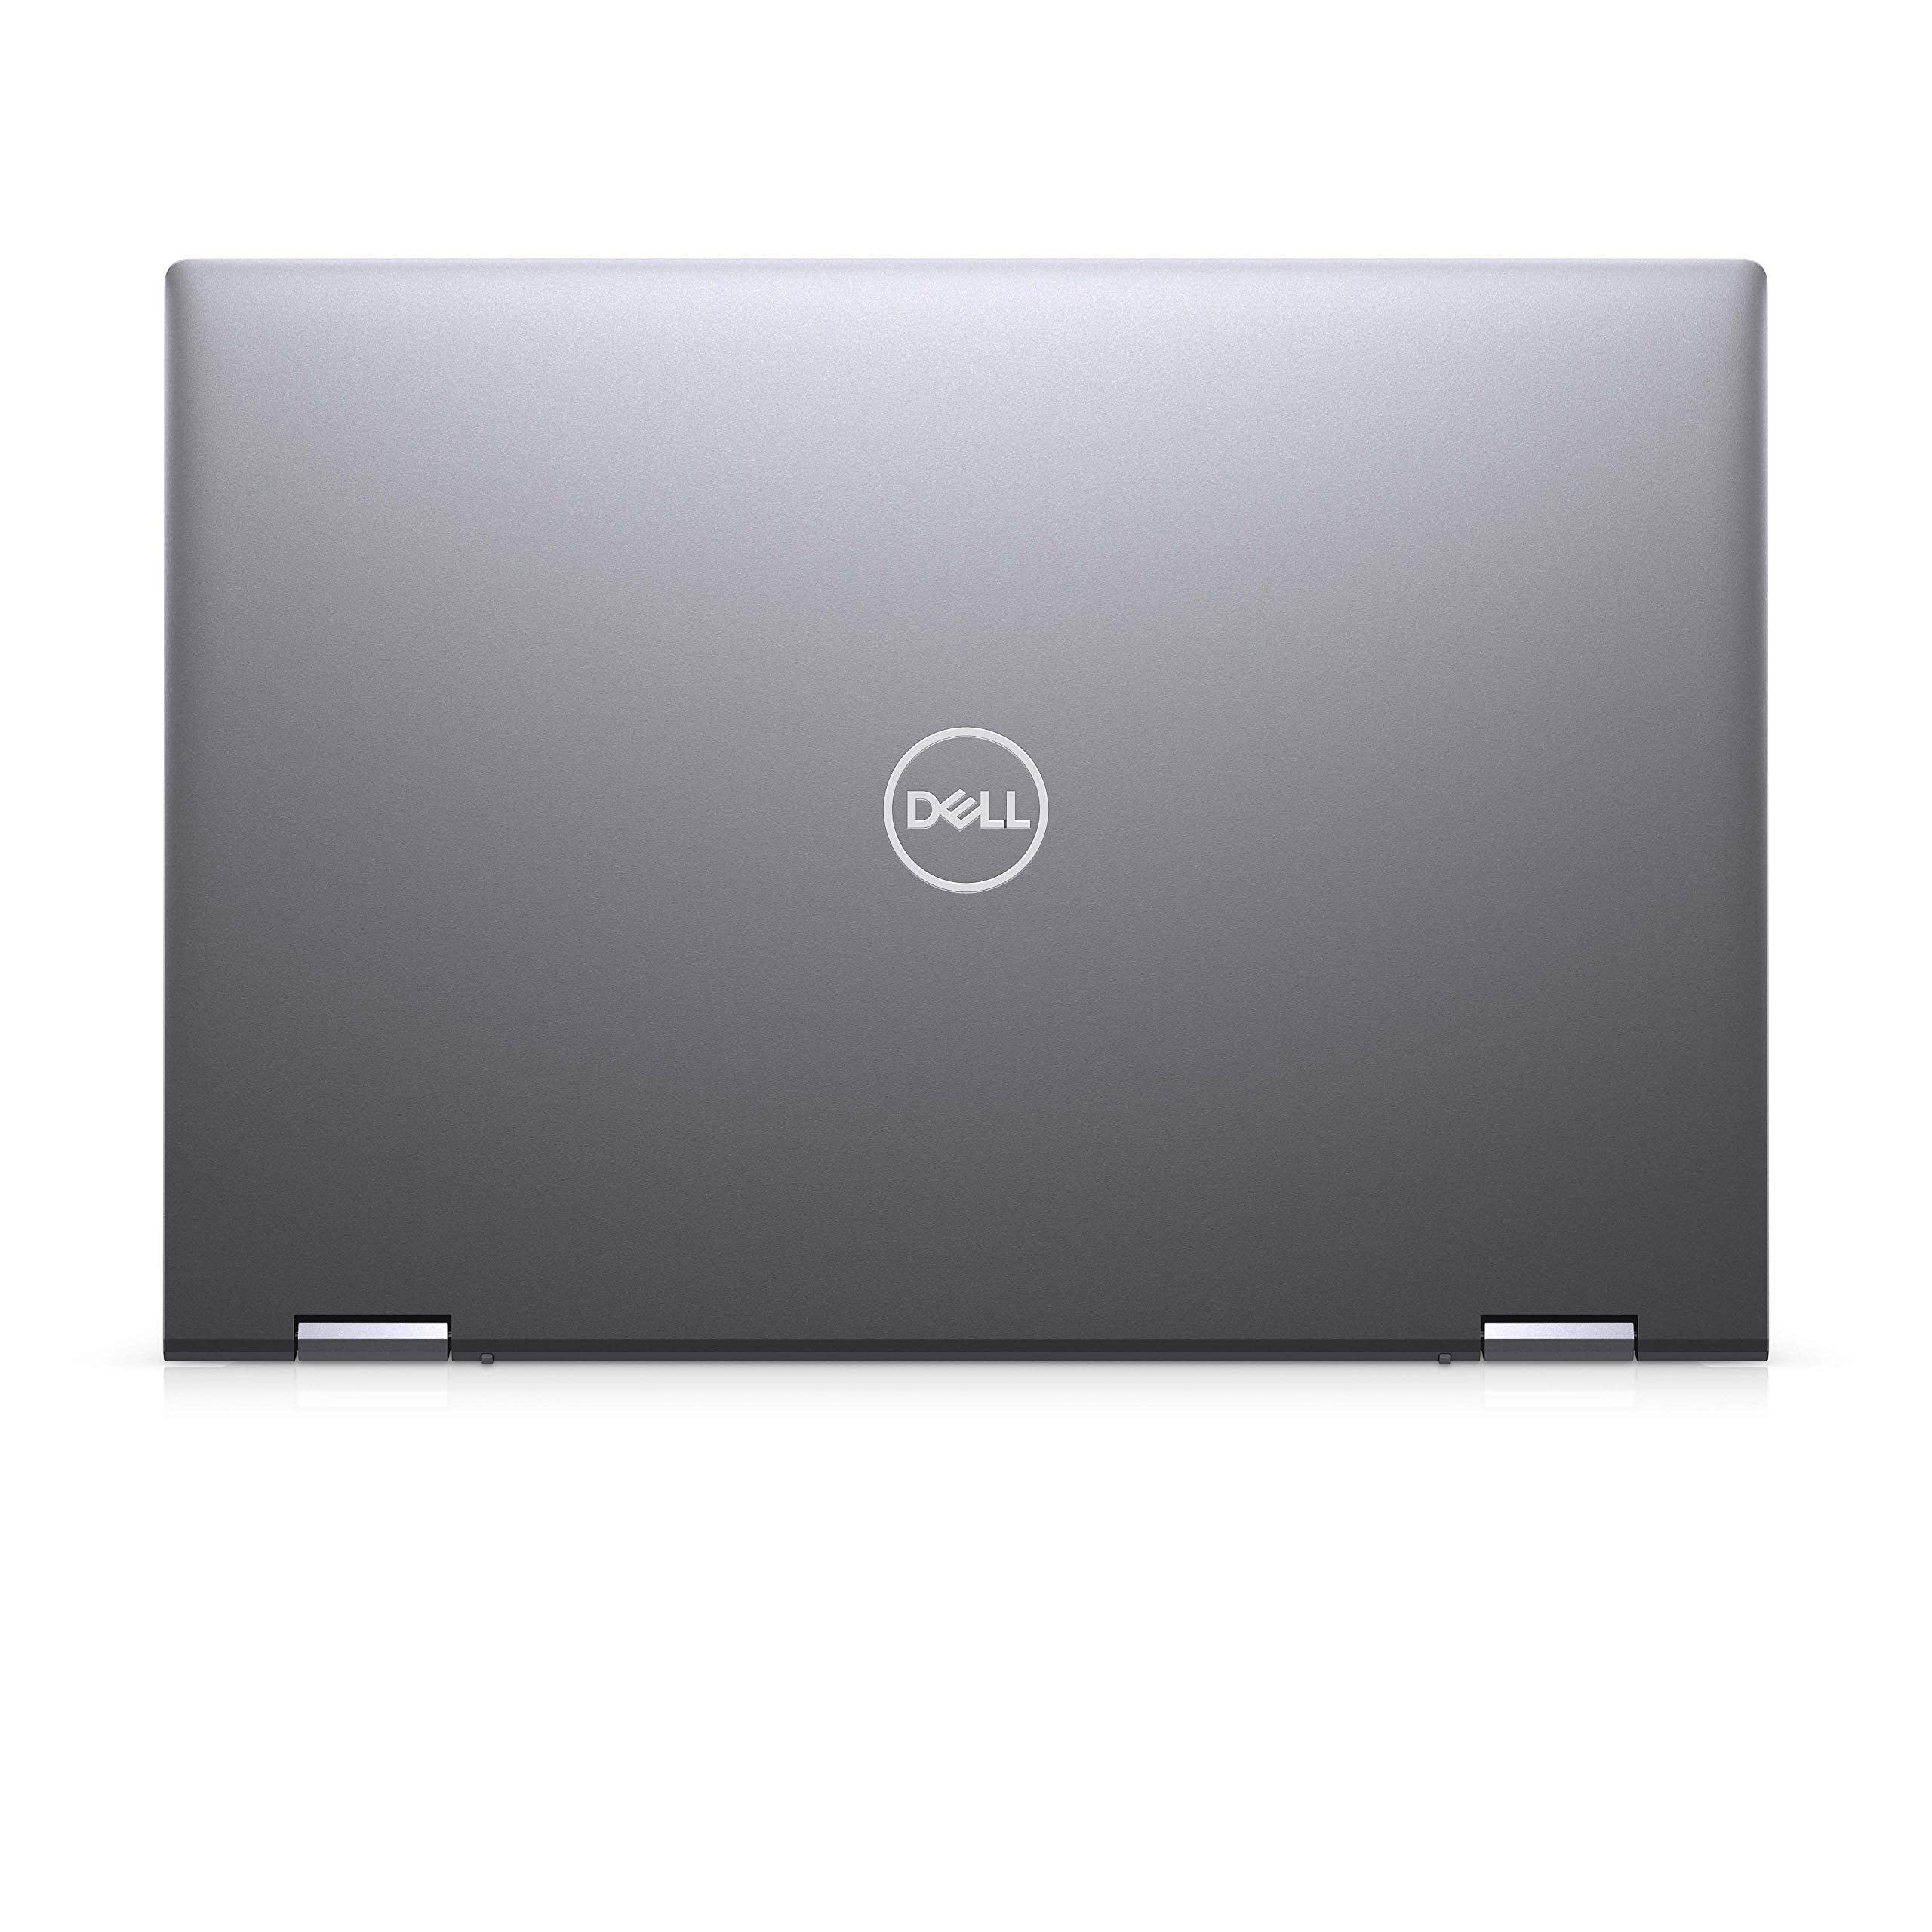 Flagship Dell Inspiron 14 5000 2 in 1 Laptop 14